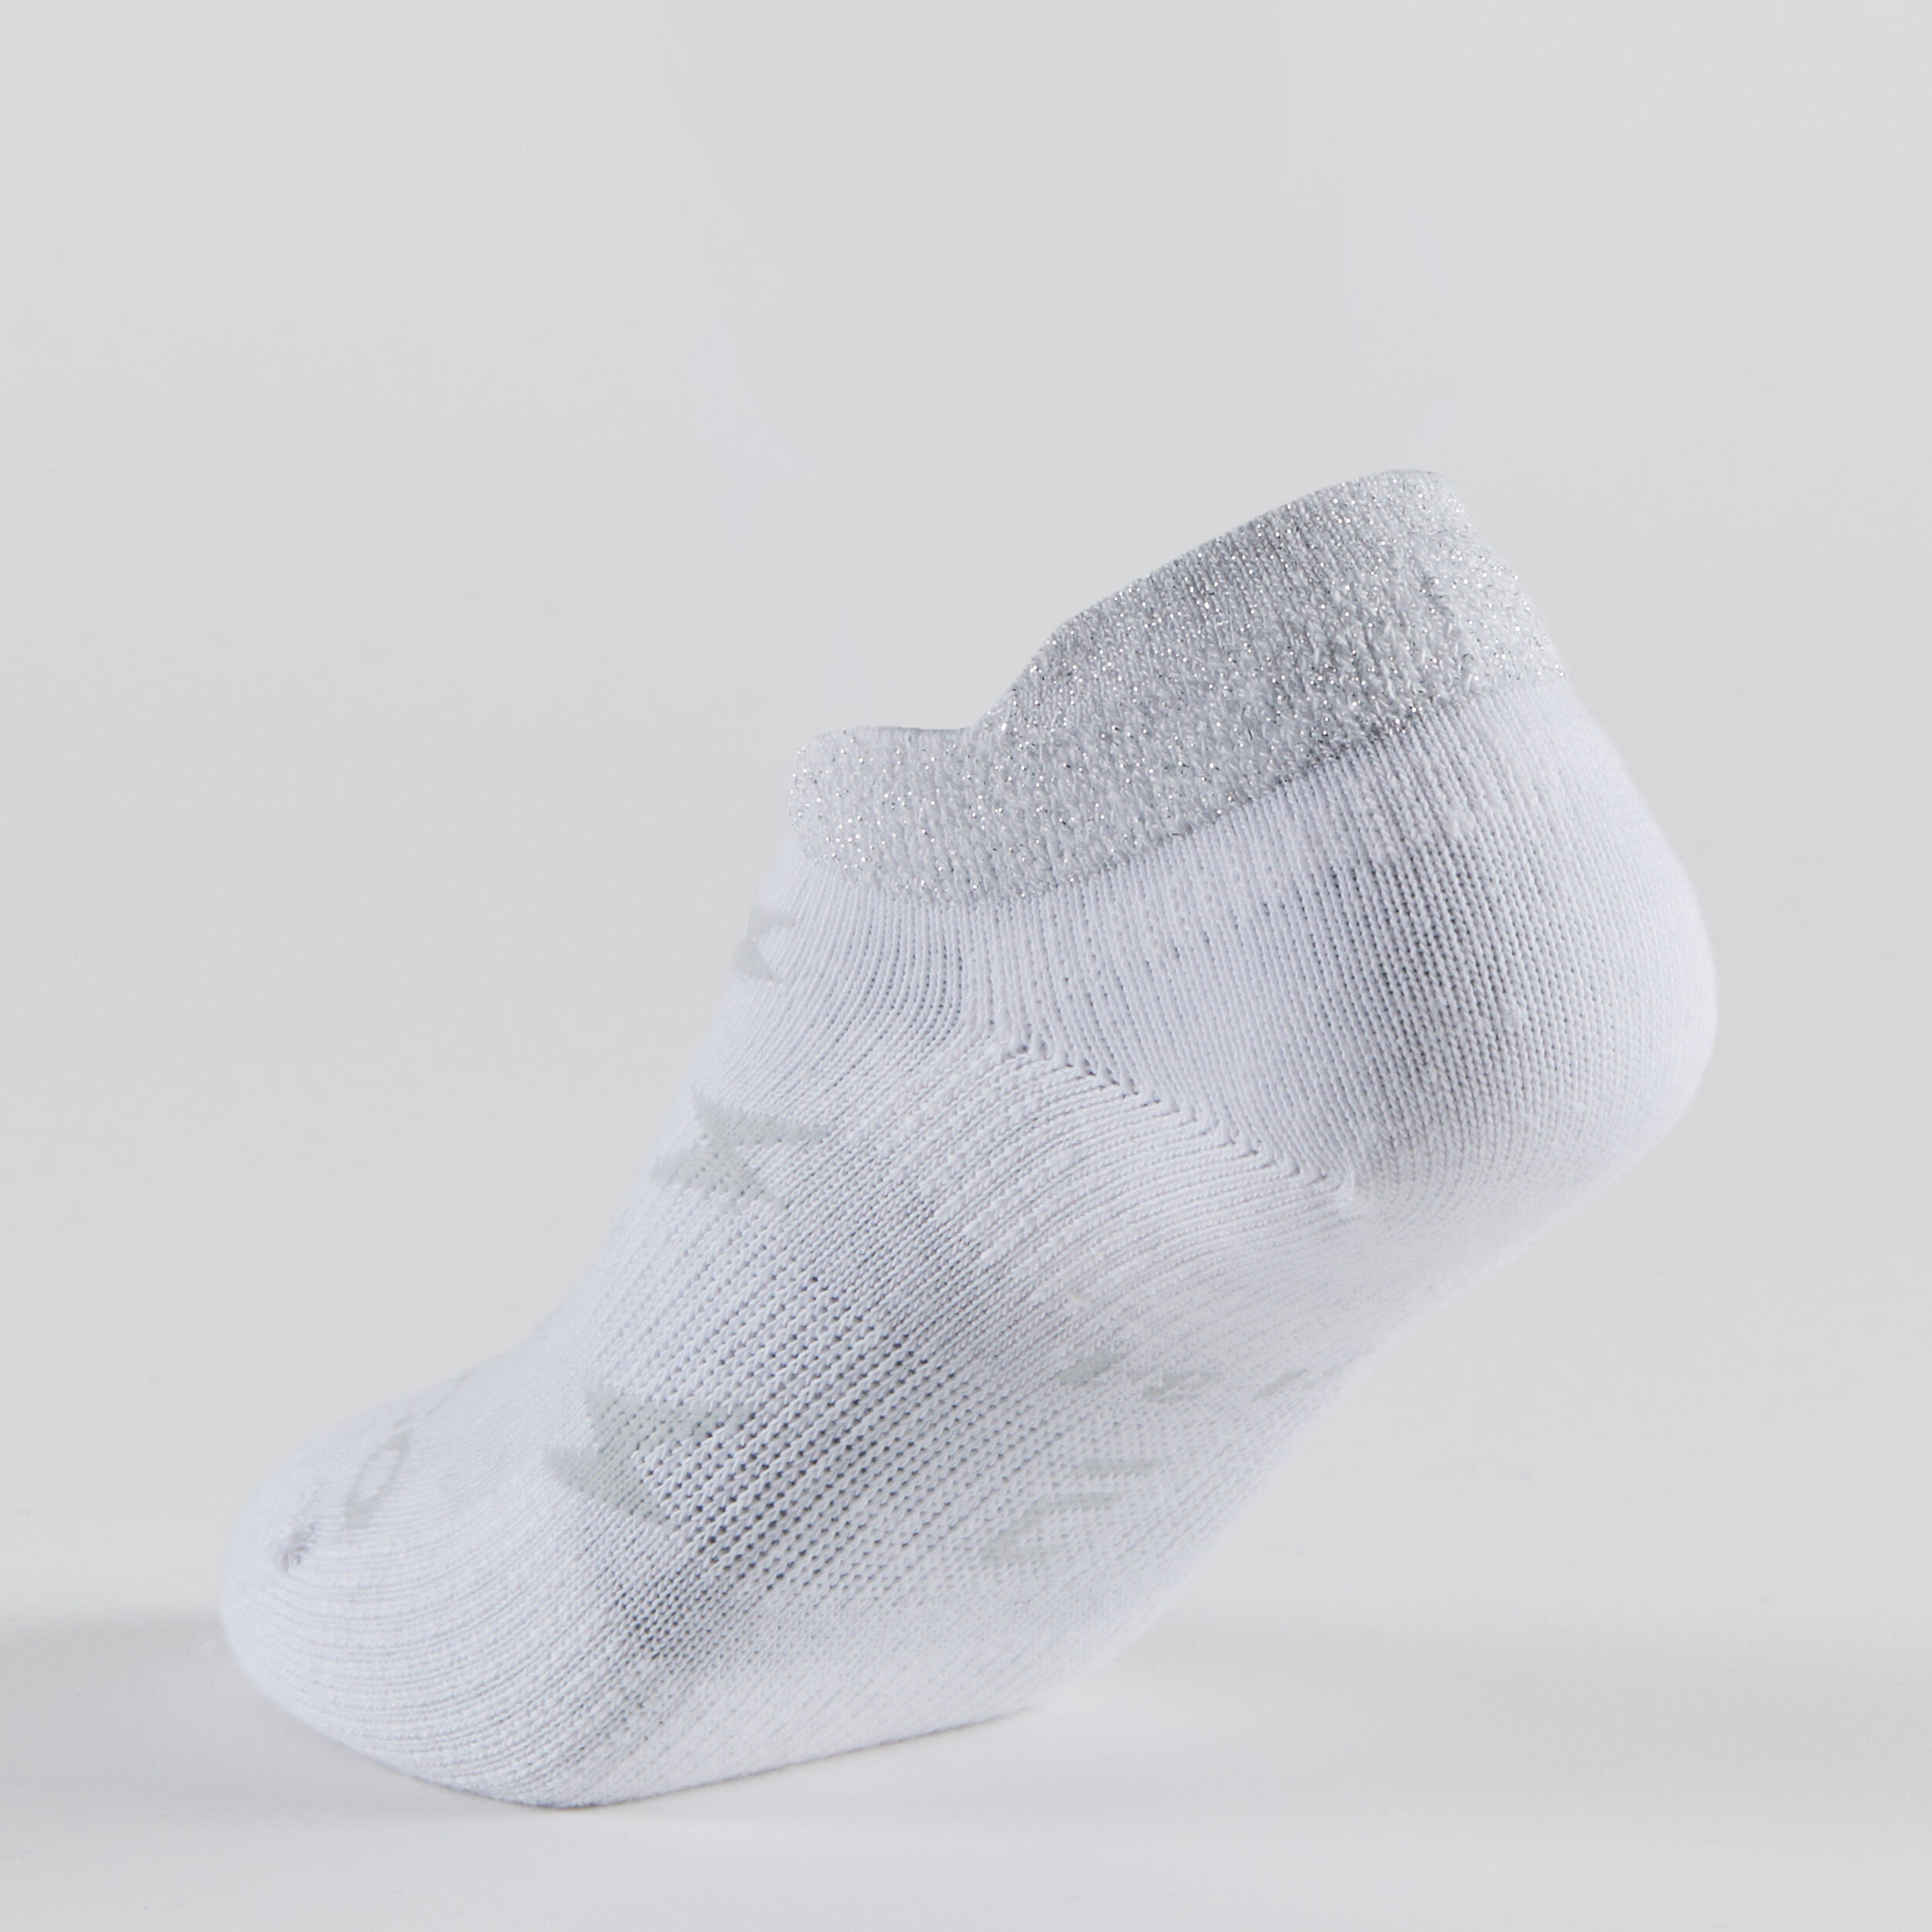 Kids' Low Tennis Socks Tri-Pack RS 160 - White with Patterns 8/14